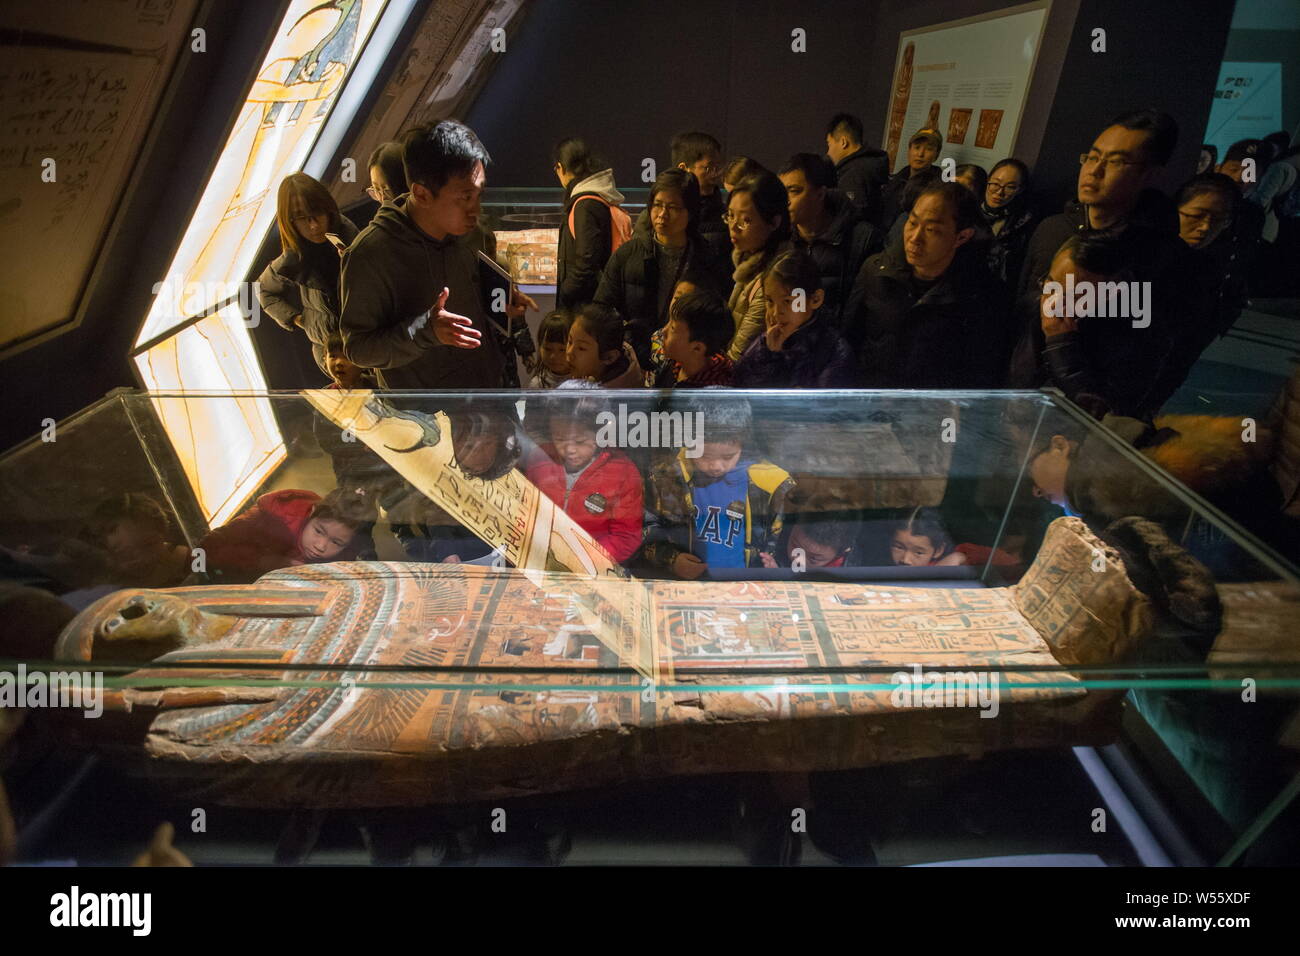 People visit an exhibition of ancient Egyptian civilization at Zhejiang West Lake Gallery in Hangzhou city, east China's Zhejiang province, 23 Februar Stock Photo